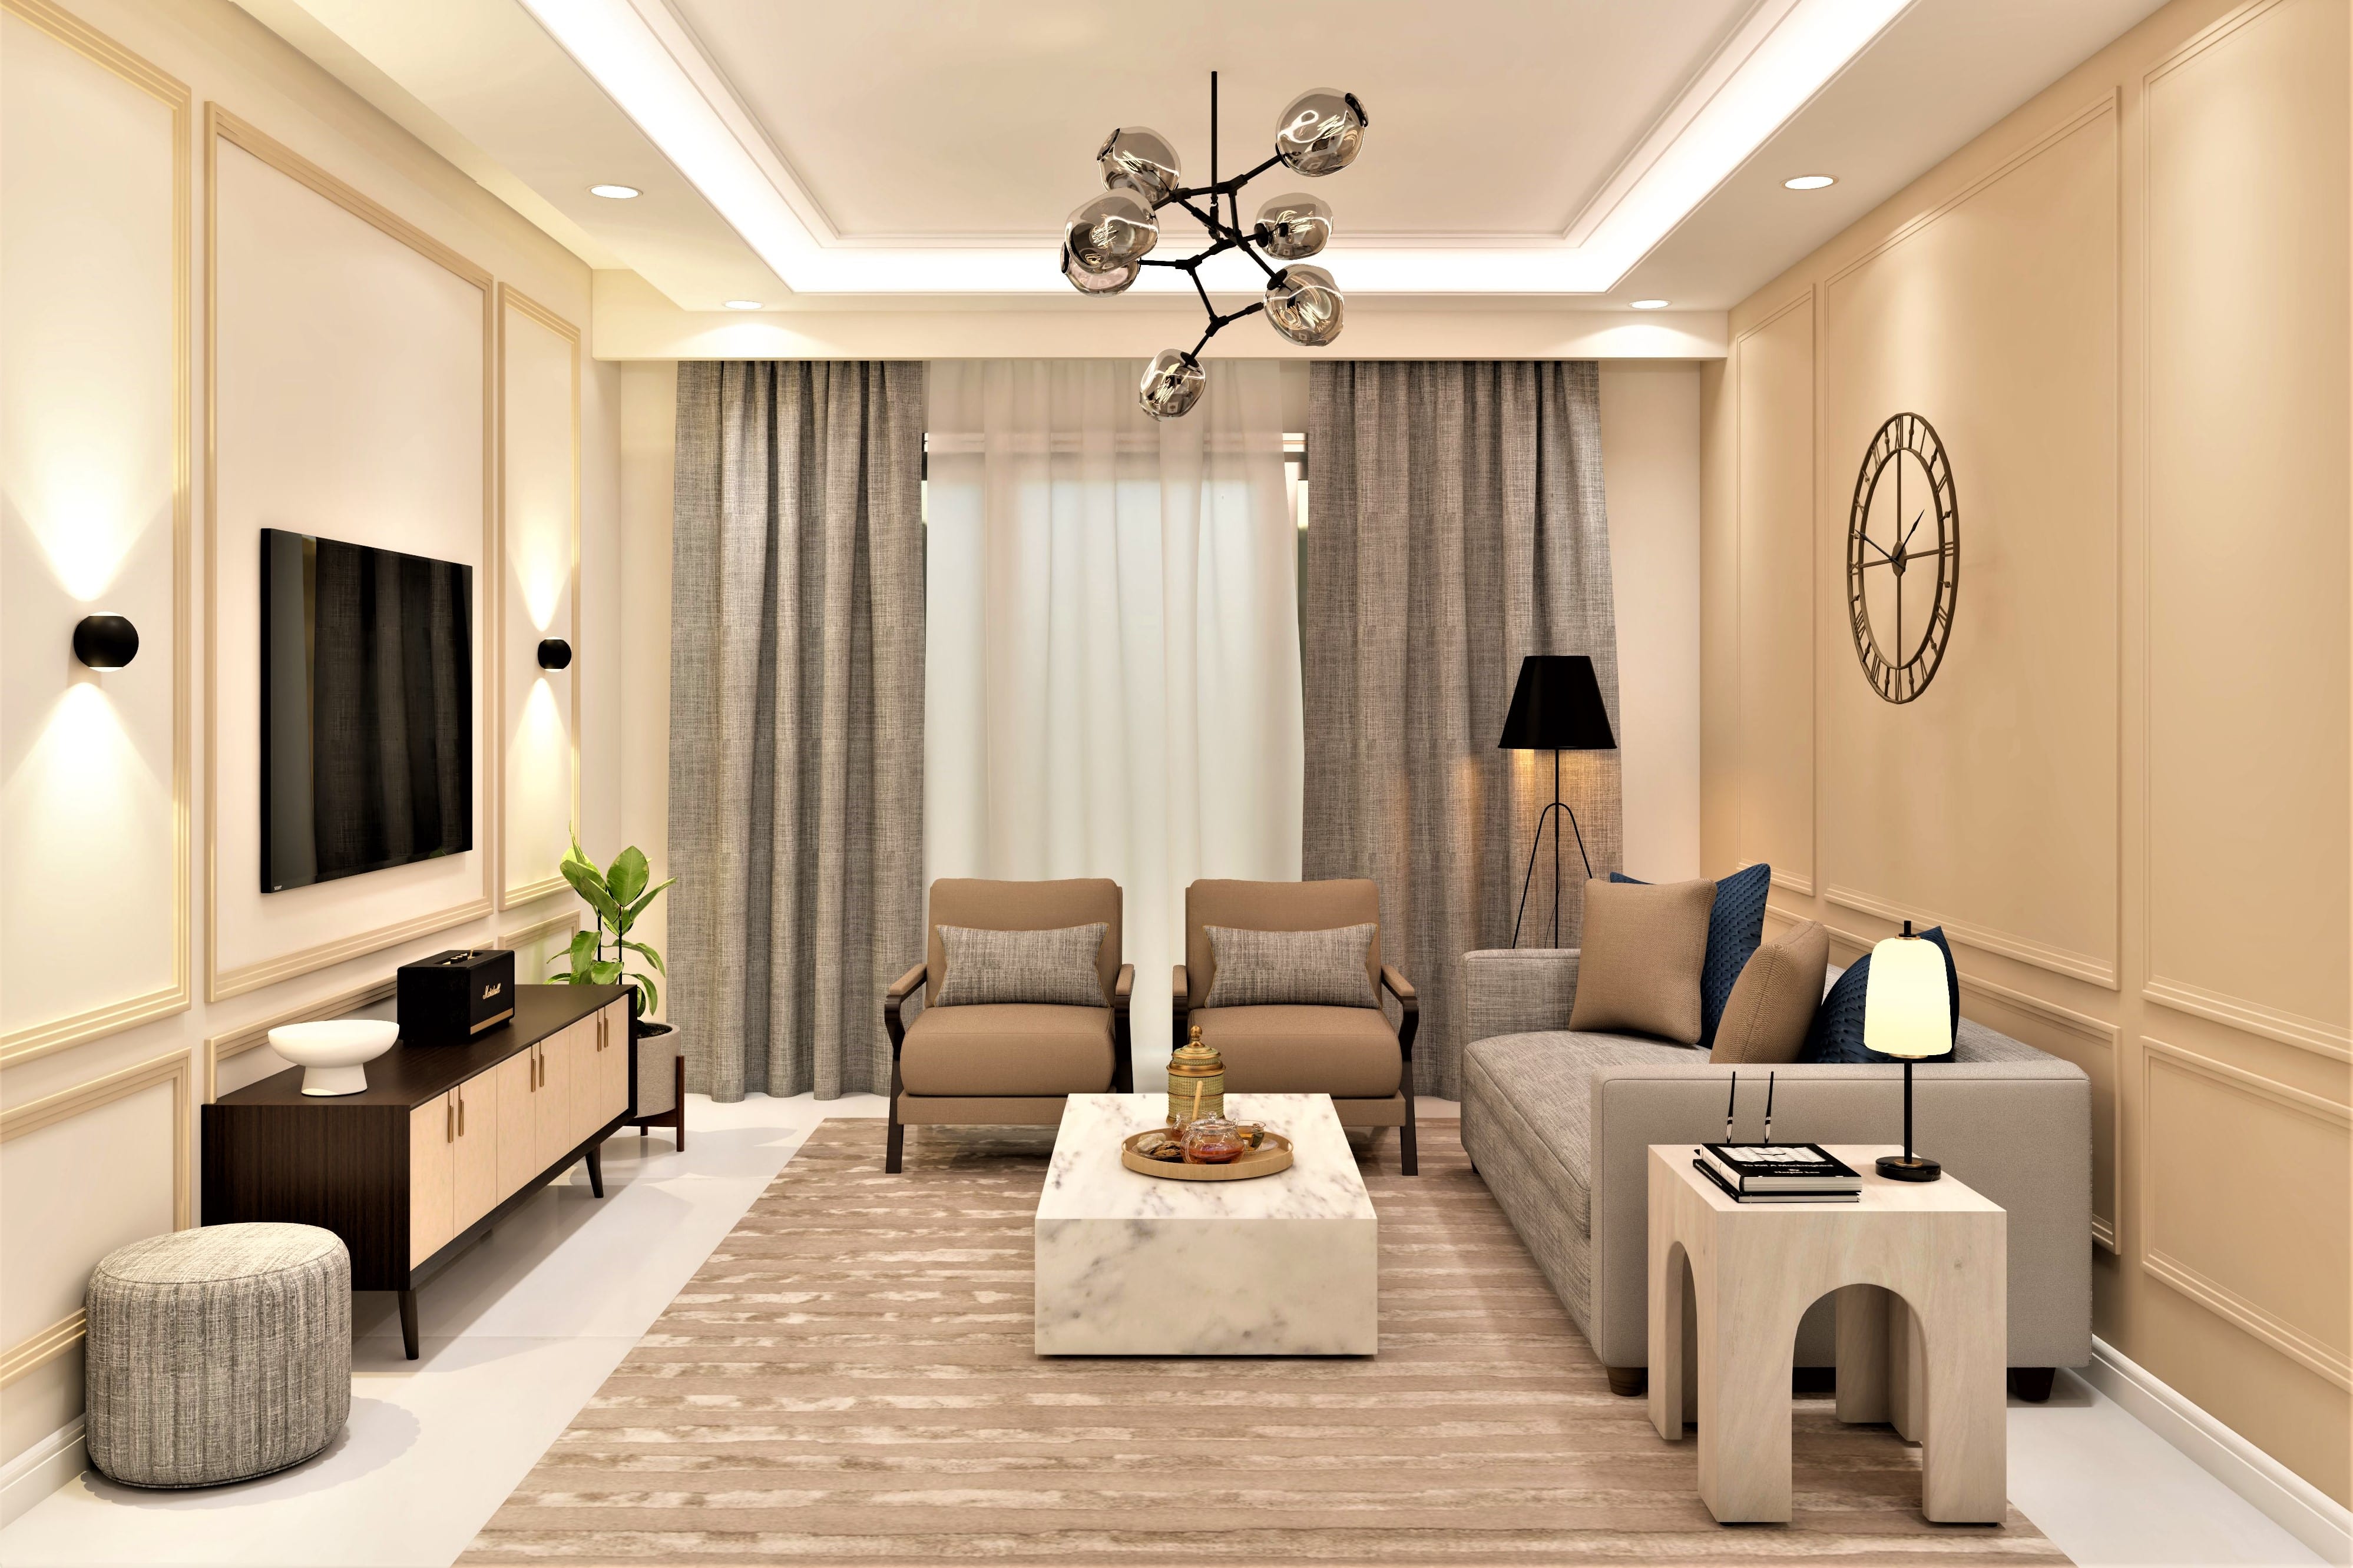 Elegant & luxurious living room design ideas for your home - Beautiful Homes